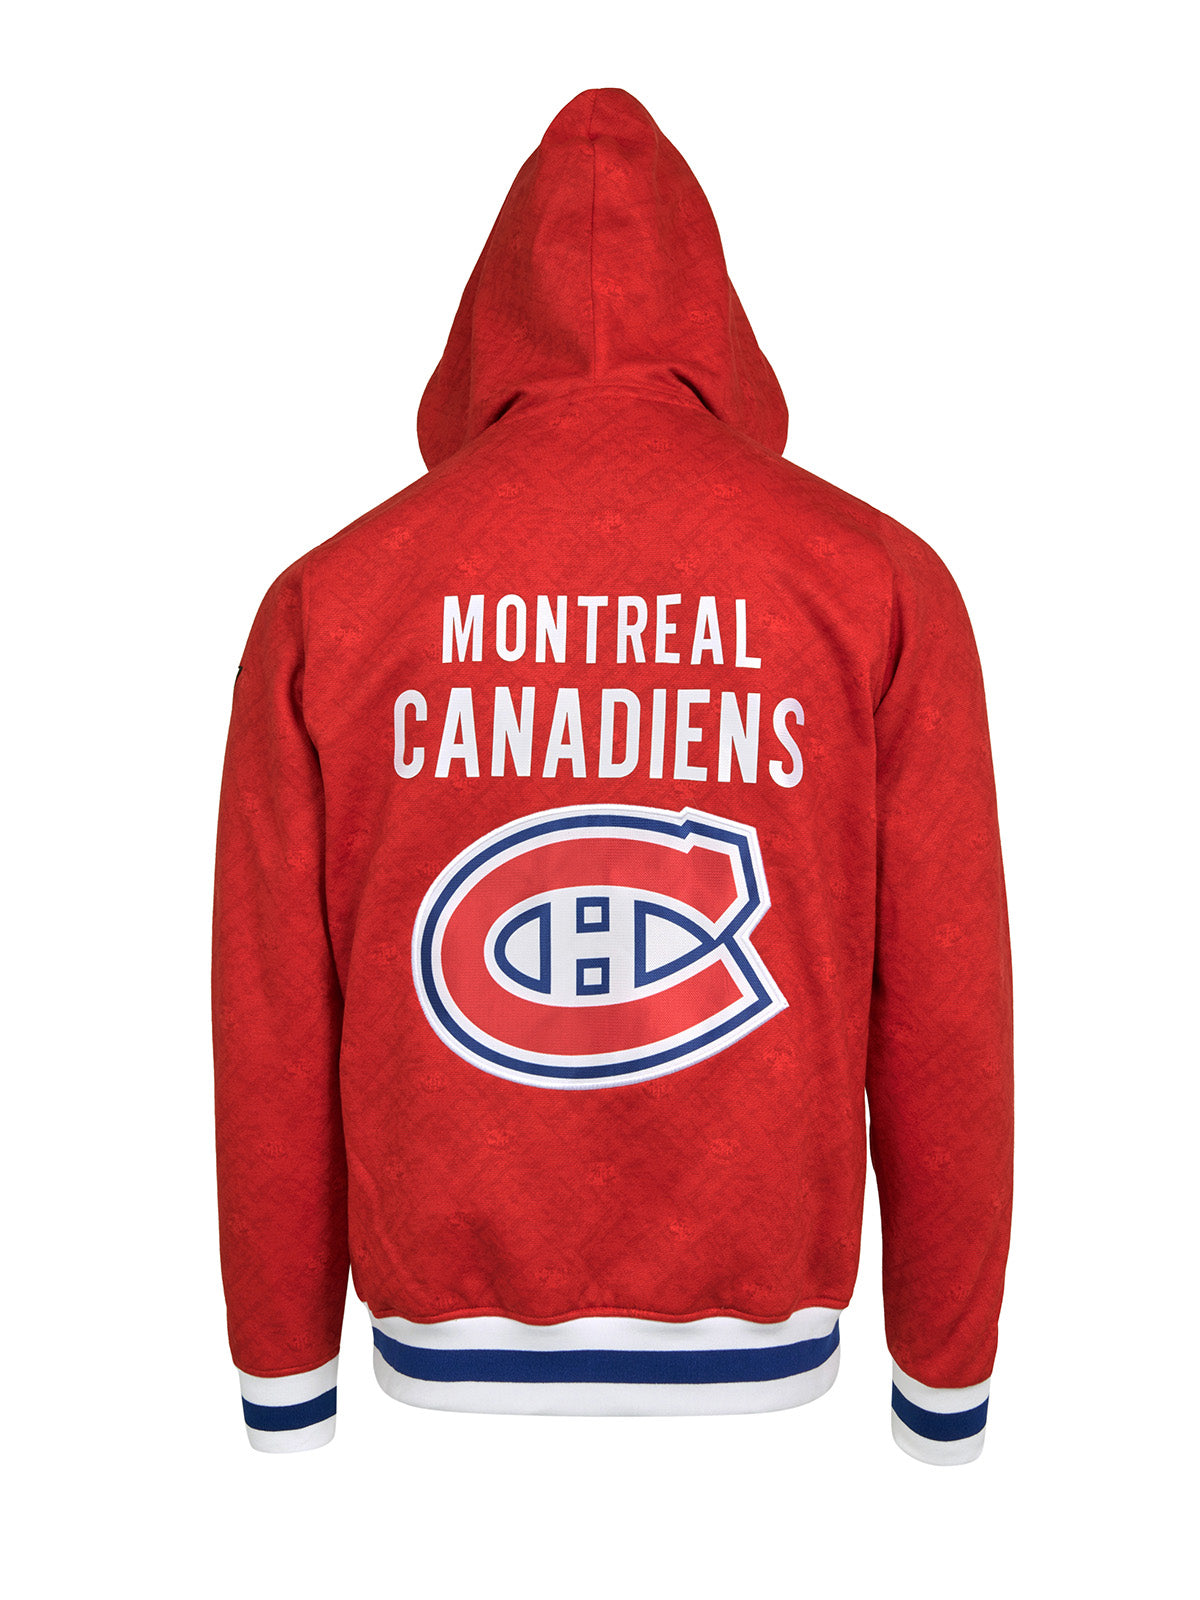 Montreal Canadiens Hoodie - Show your team spirit, with the iconic team logo patch centered on the back, and proudly display your Montreal Canadiens support in their team colors with this NHL hockey hoodie.